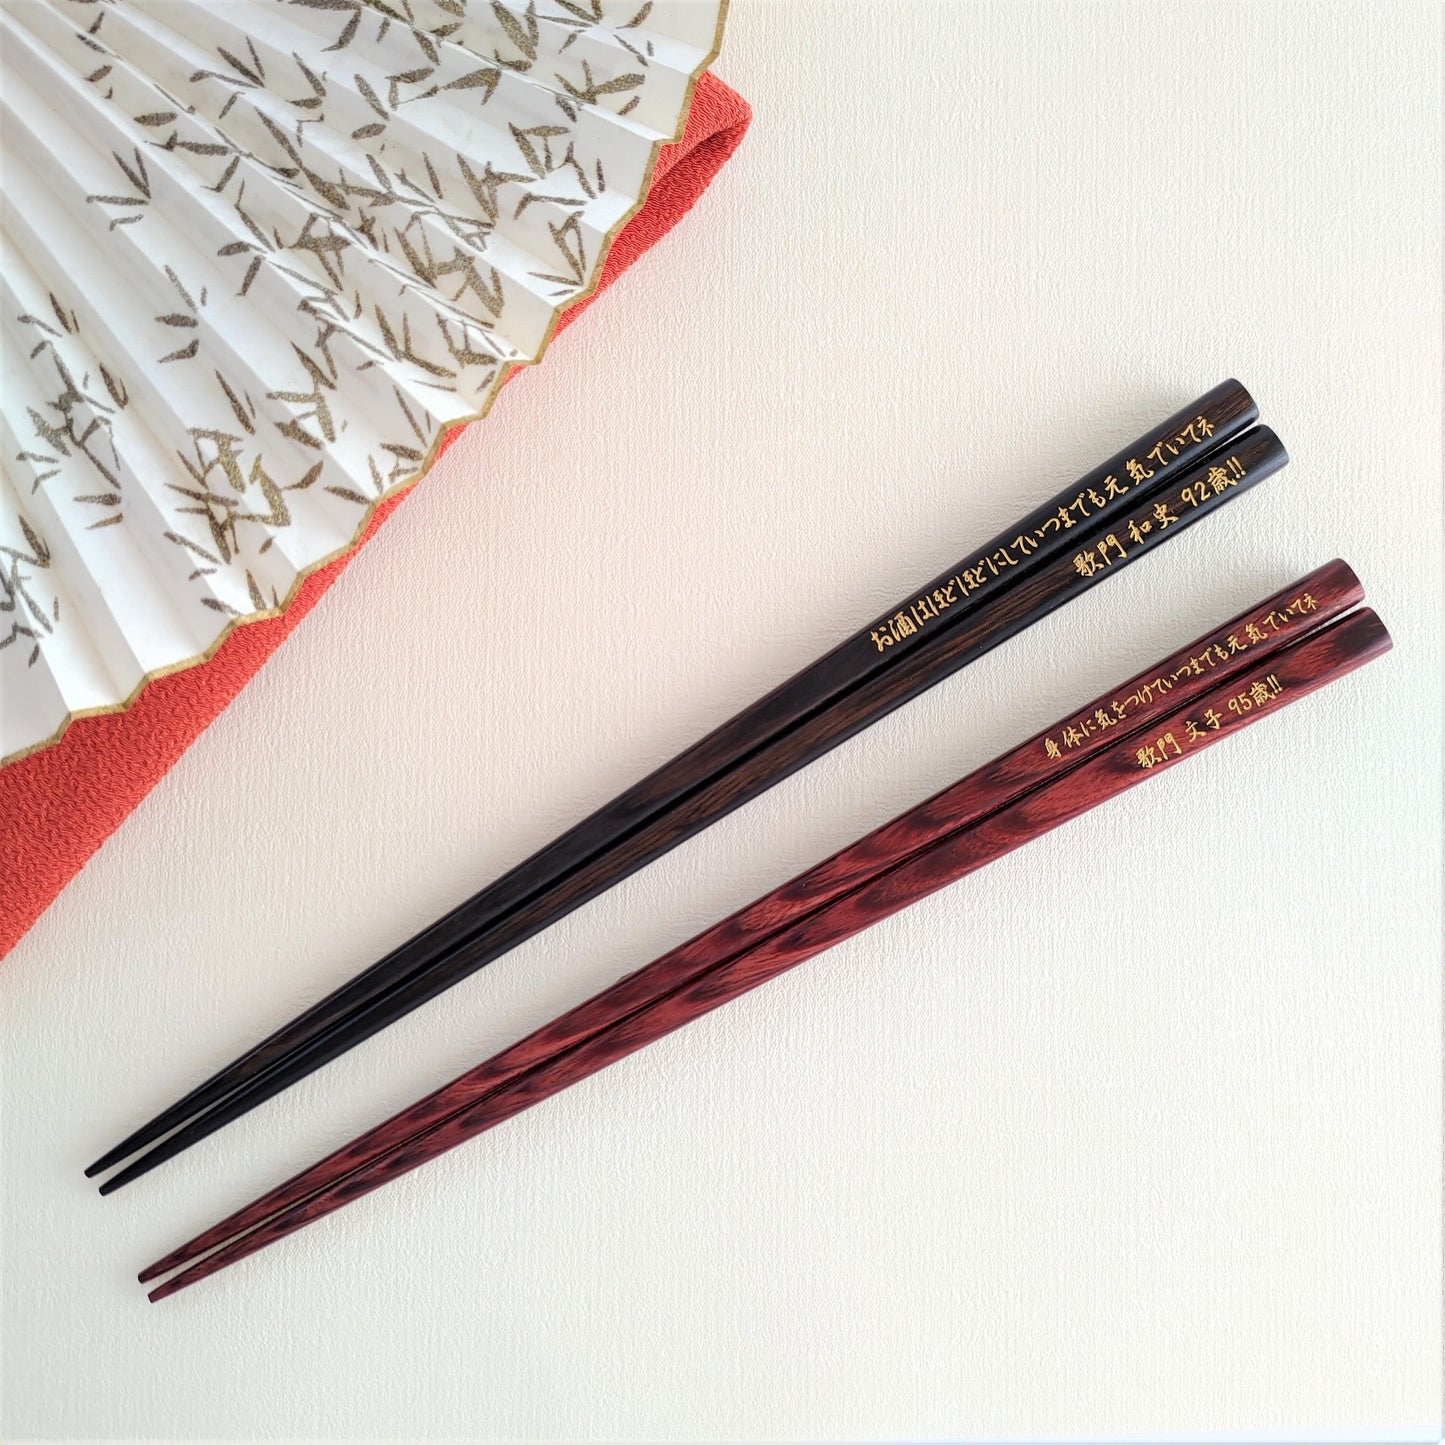 Awesome Japanese chopsticks with soft fur design black brown - DOUBLE PAIR WITH ENGRAVED WOODEN BOX SET